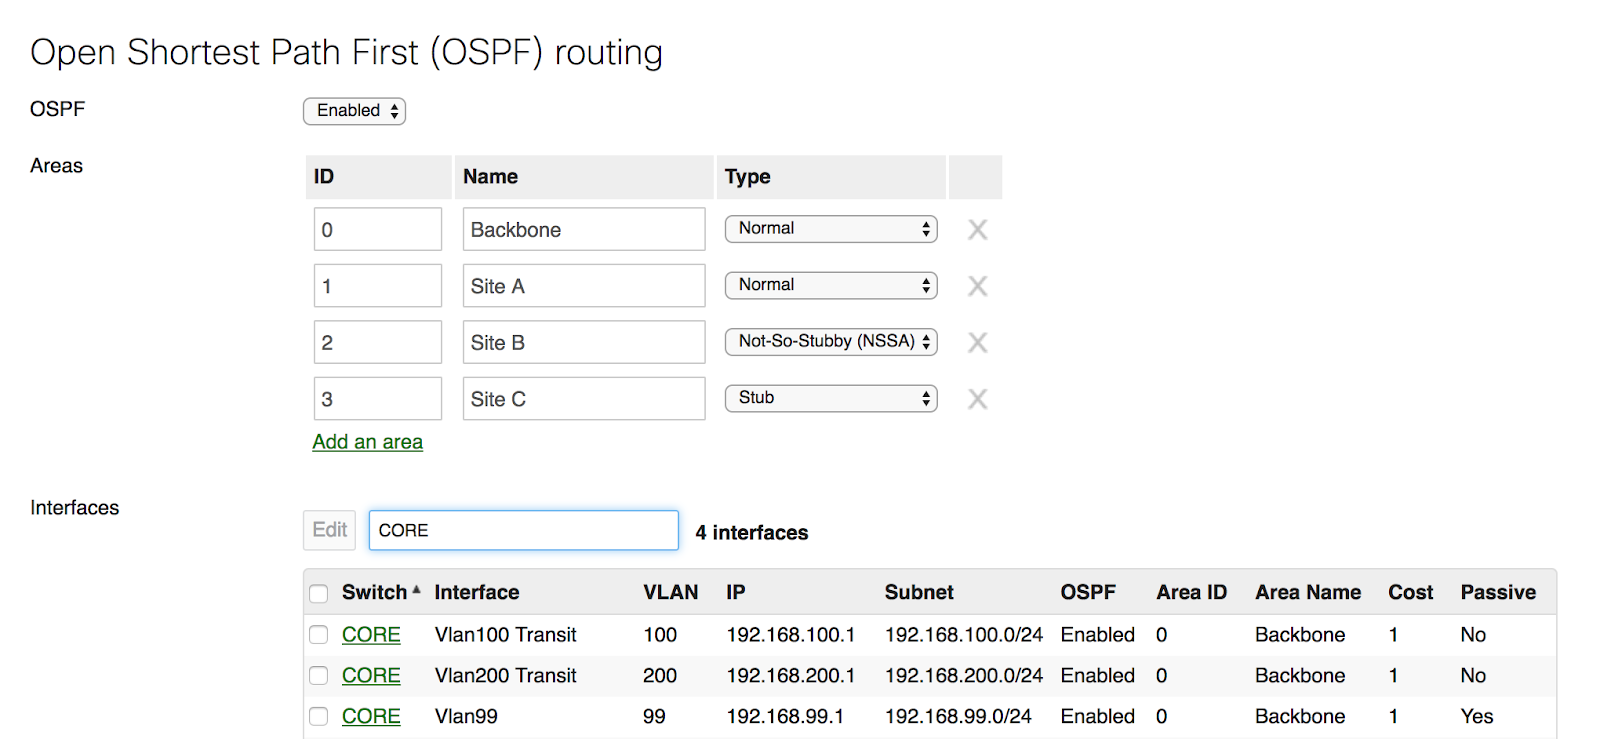 OSPF configuration page with multiple areas and VLANs created.